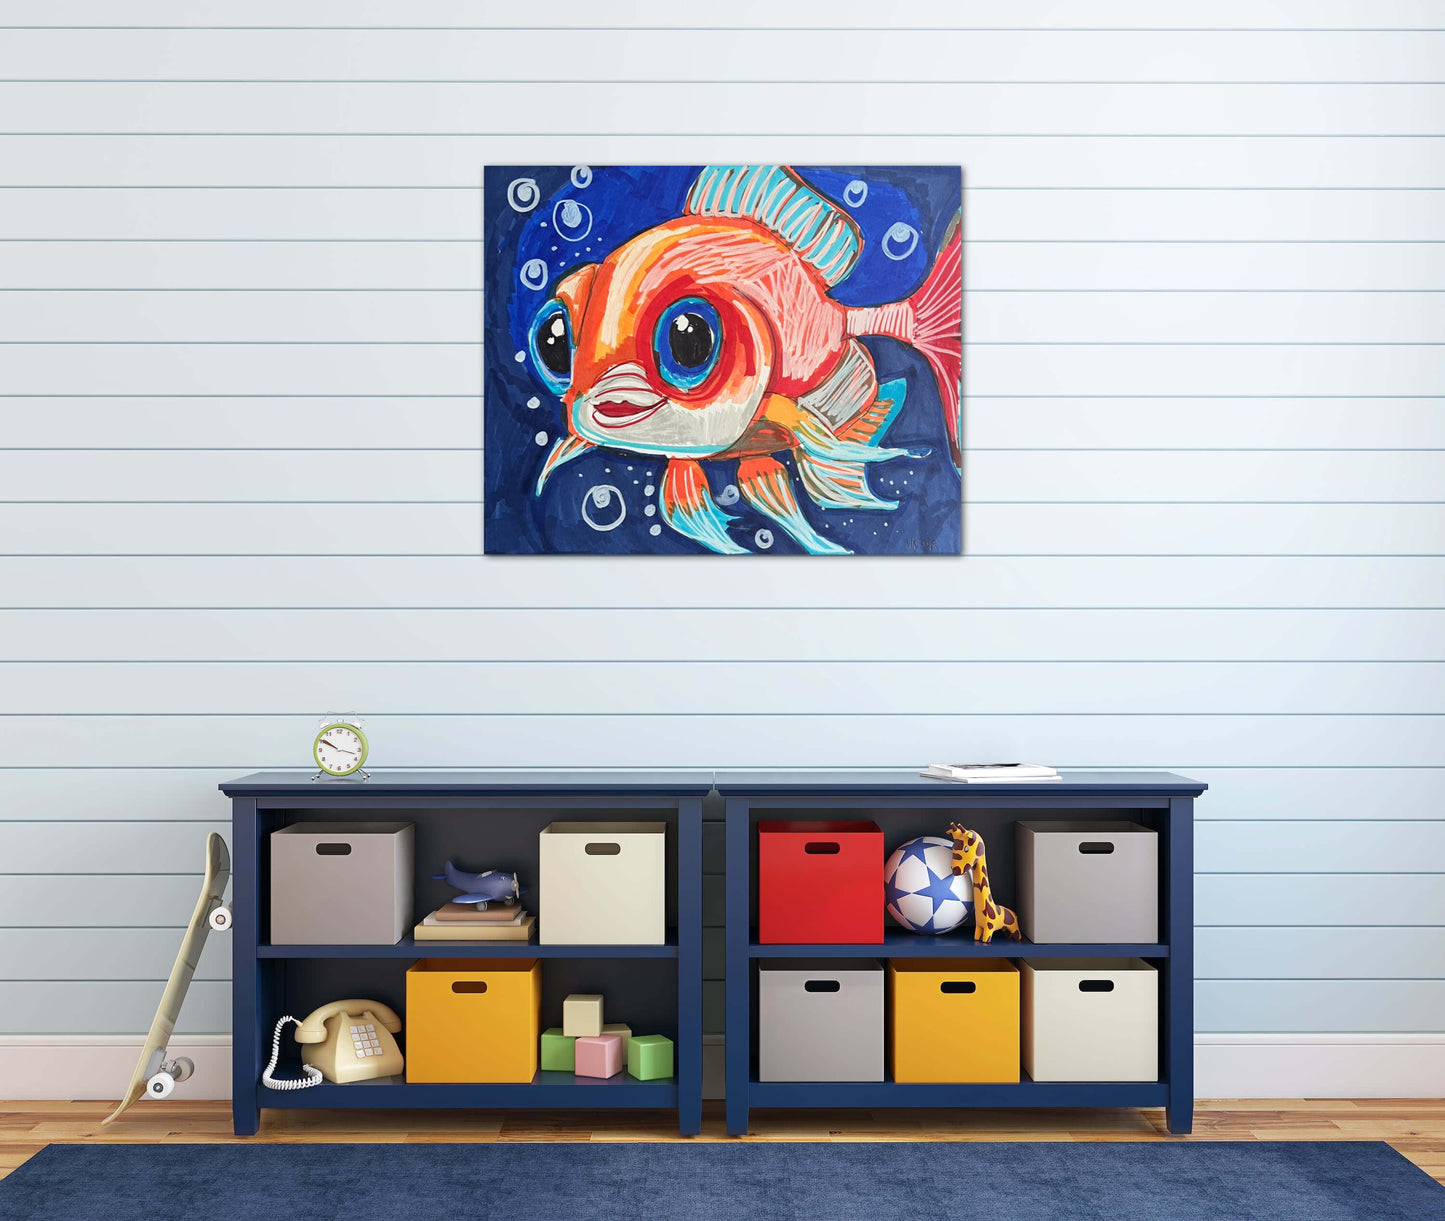 Nemo - Print, Poster, Stretched Canvas Print